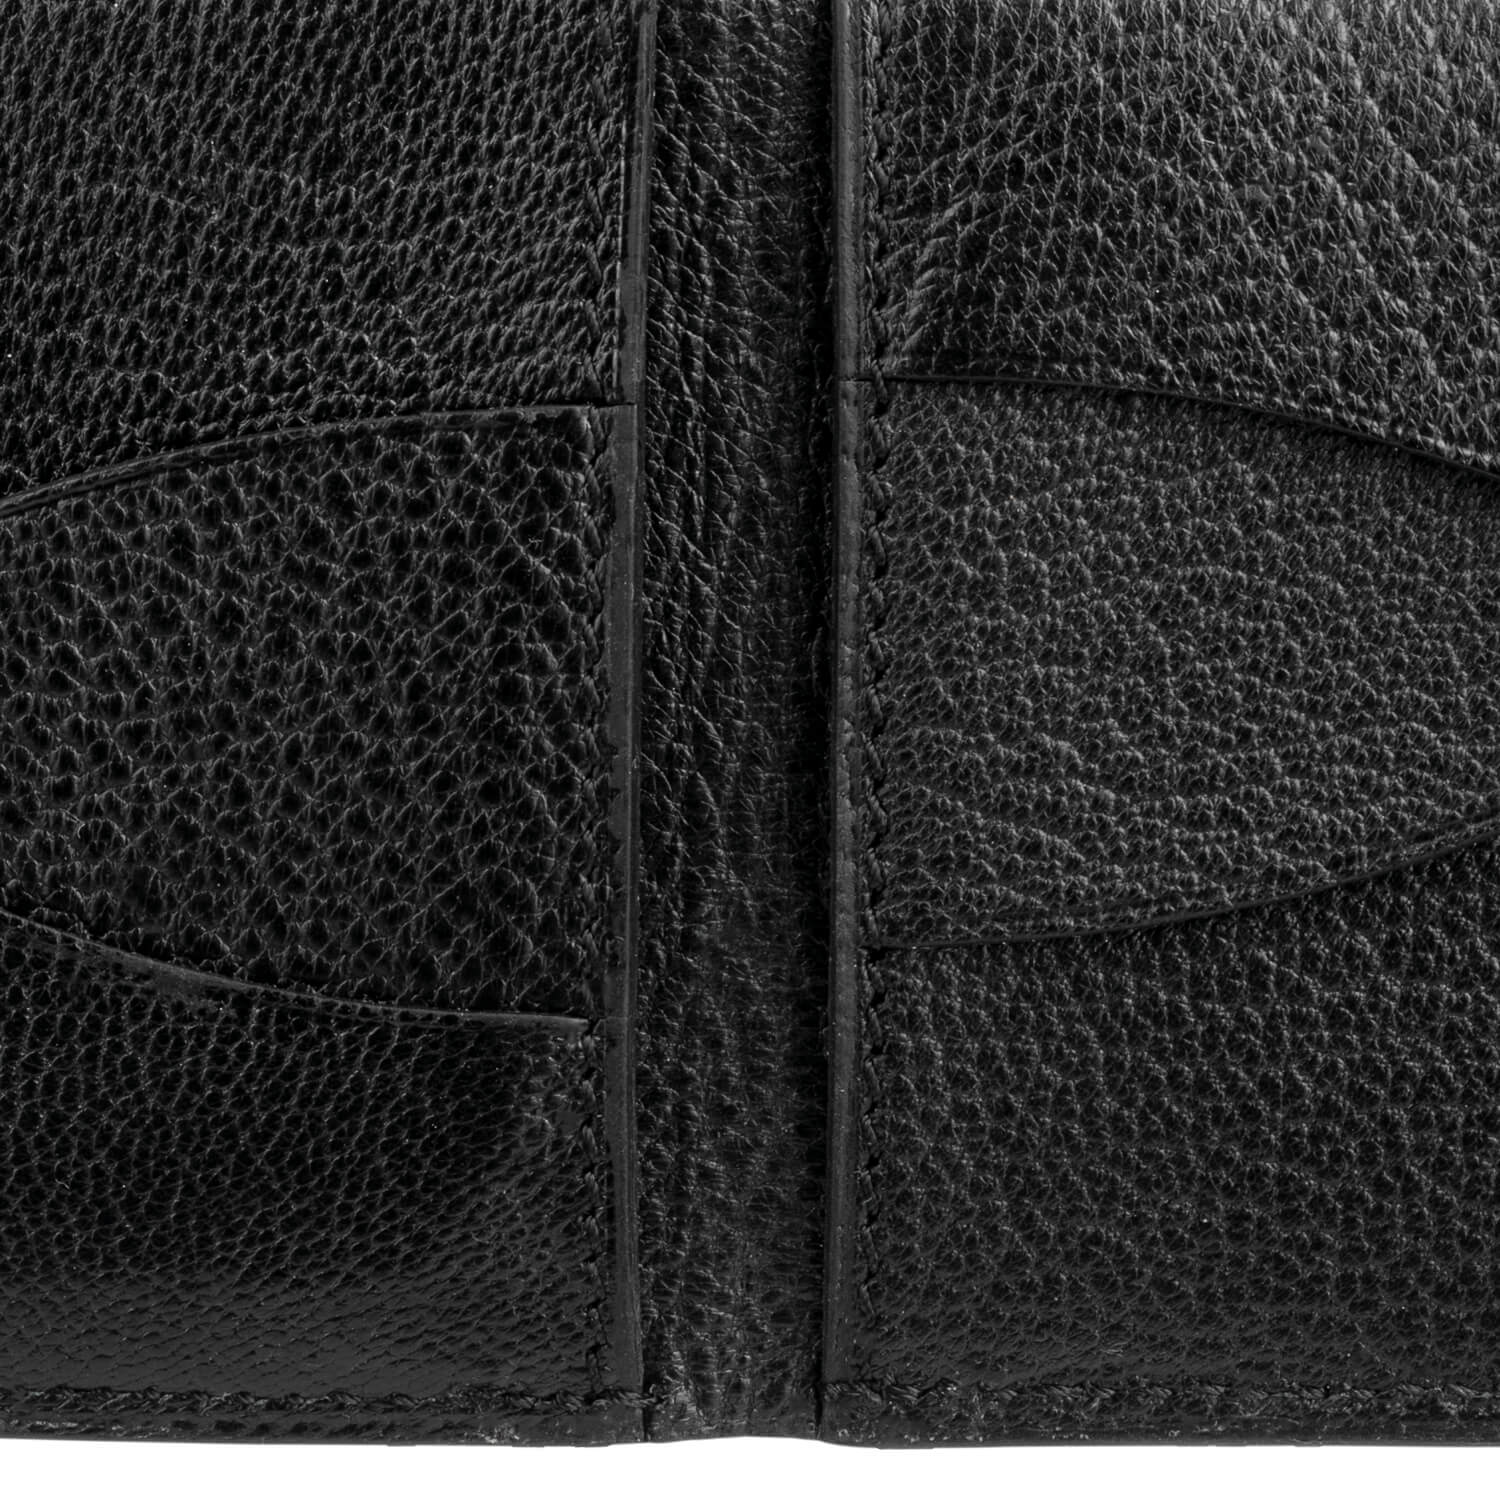 No. 4 Leather Billfold Wallet